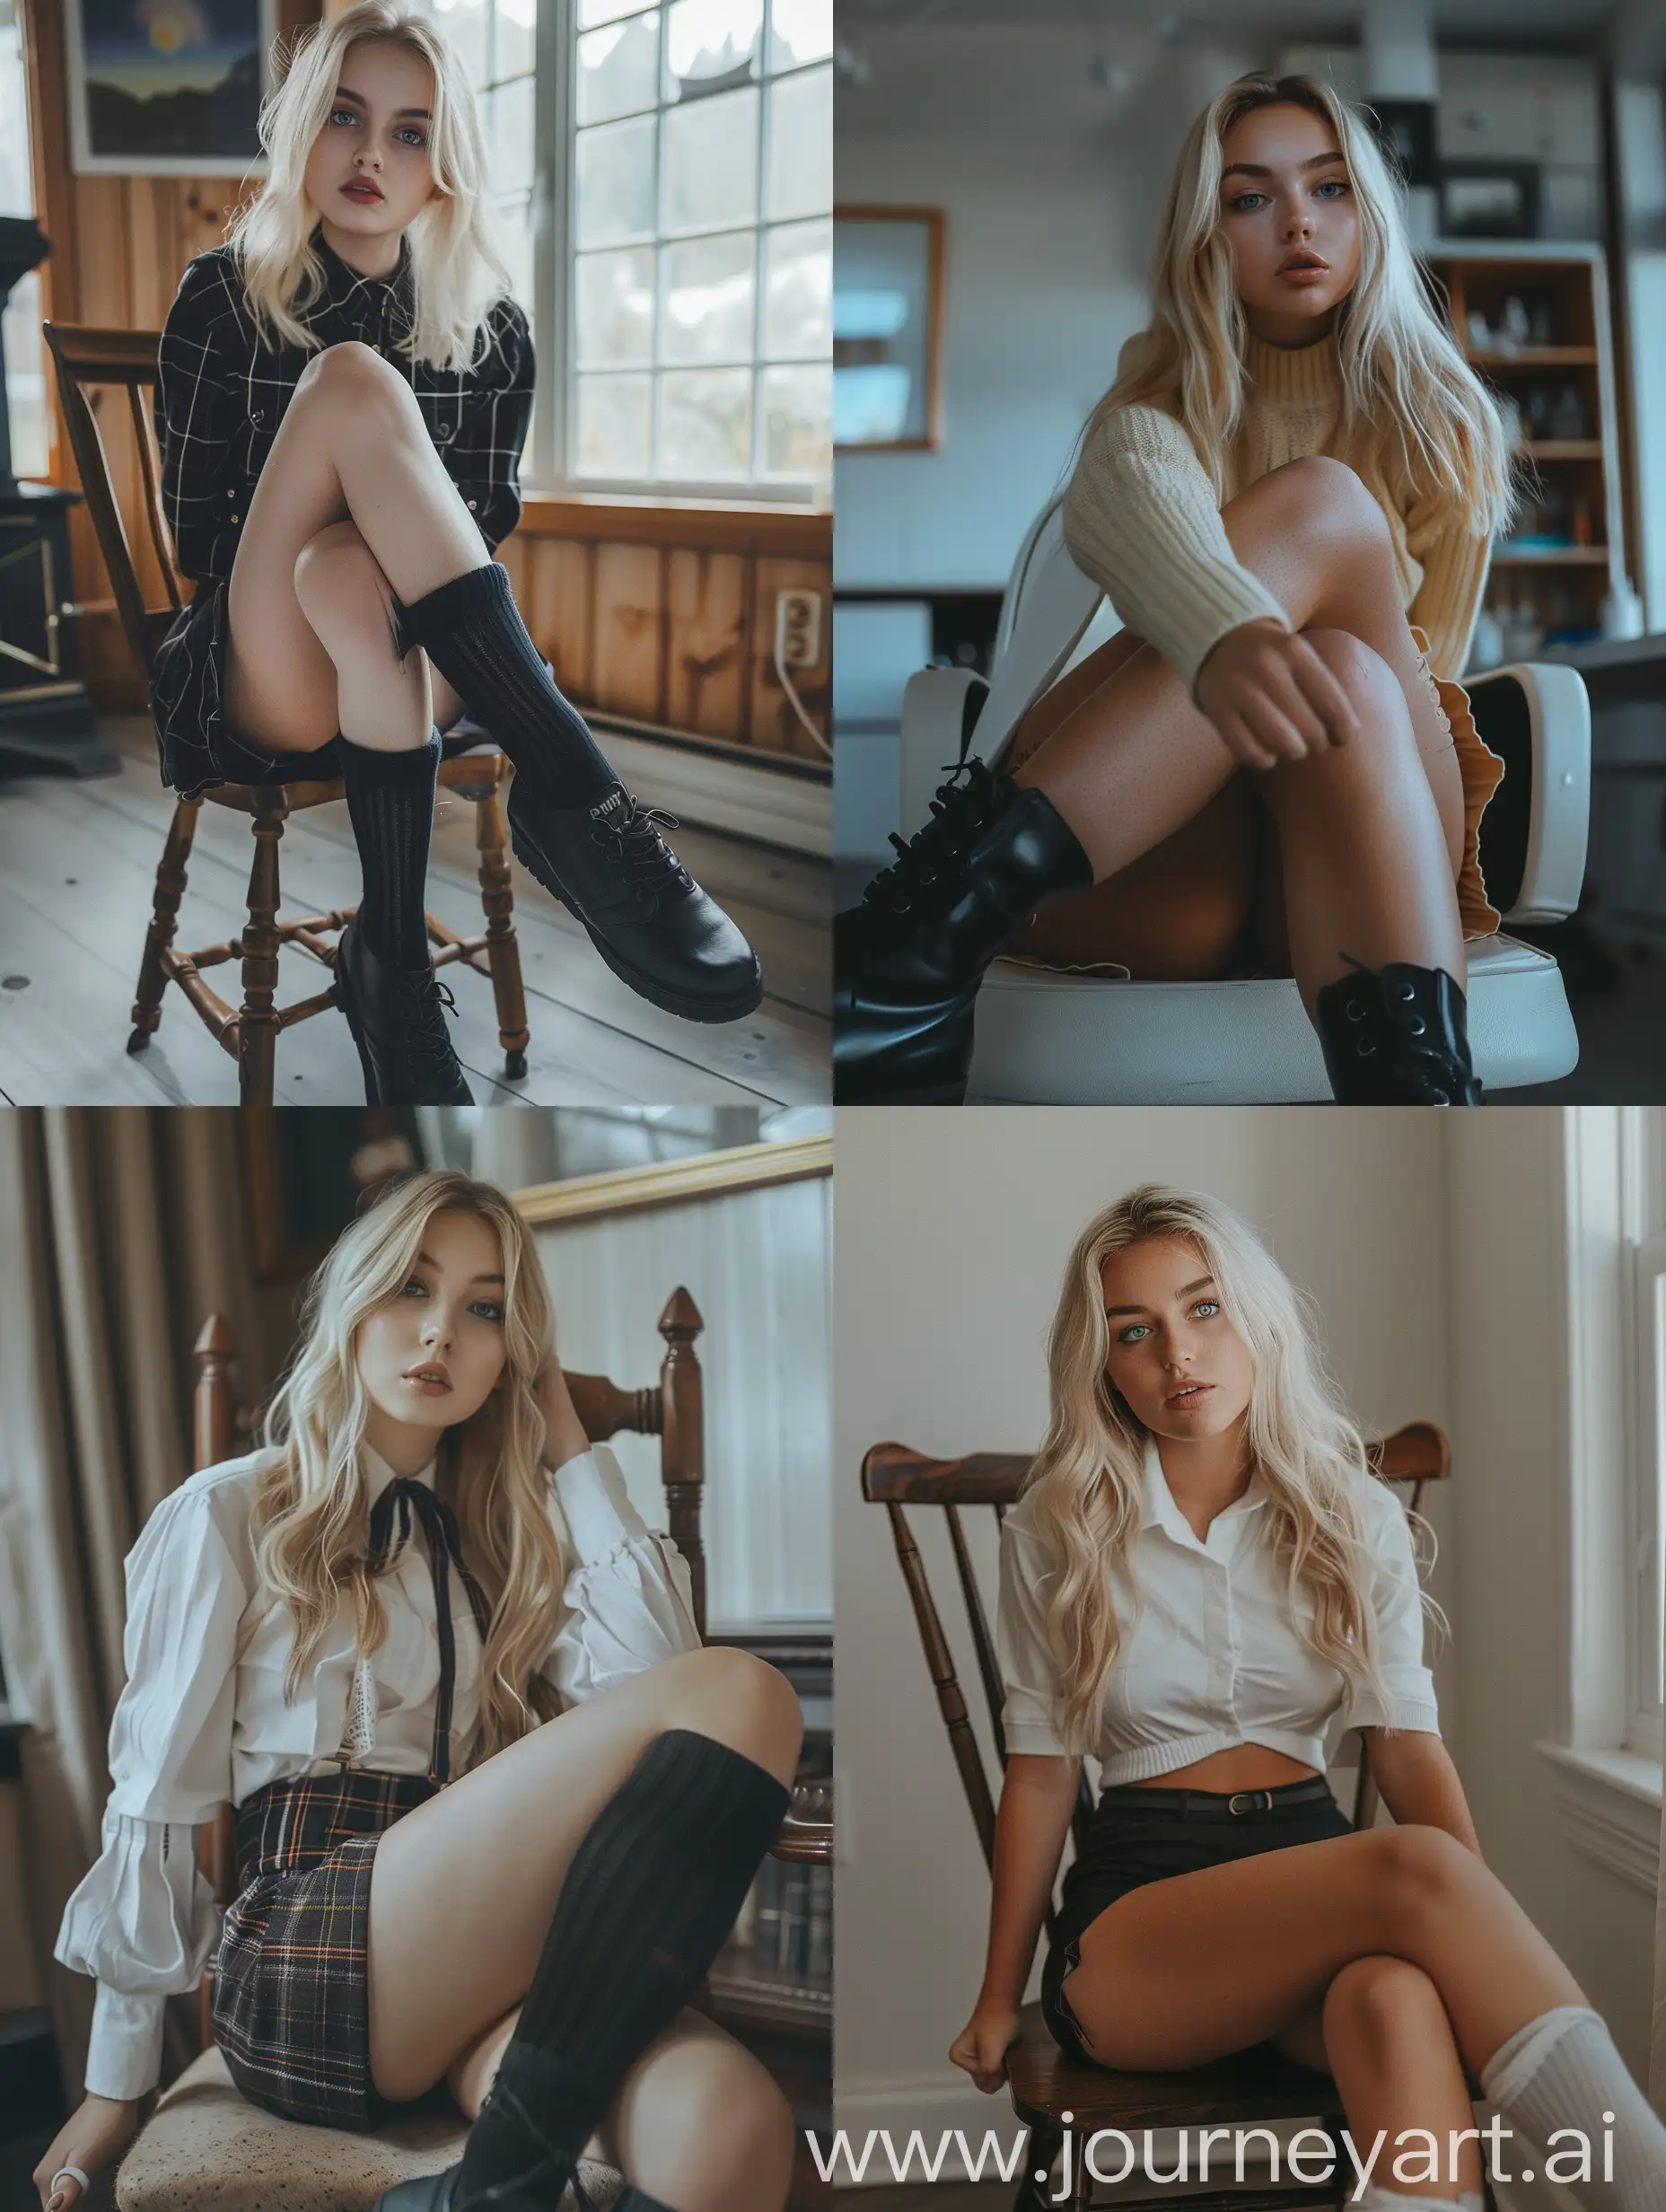 Young-Blonde-Influencer-in-School-Uniform-and-Black-Boots-Sitting-on-Chair